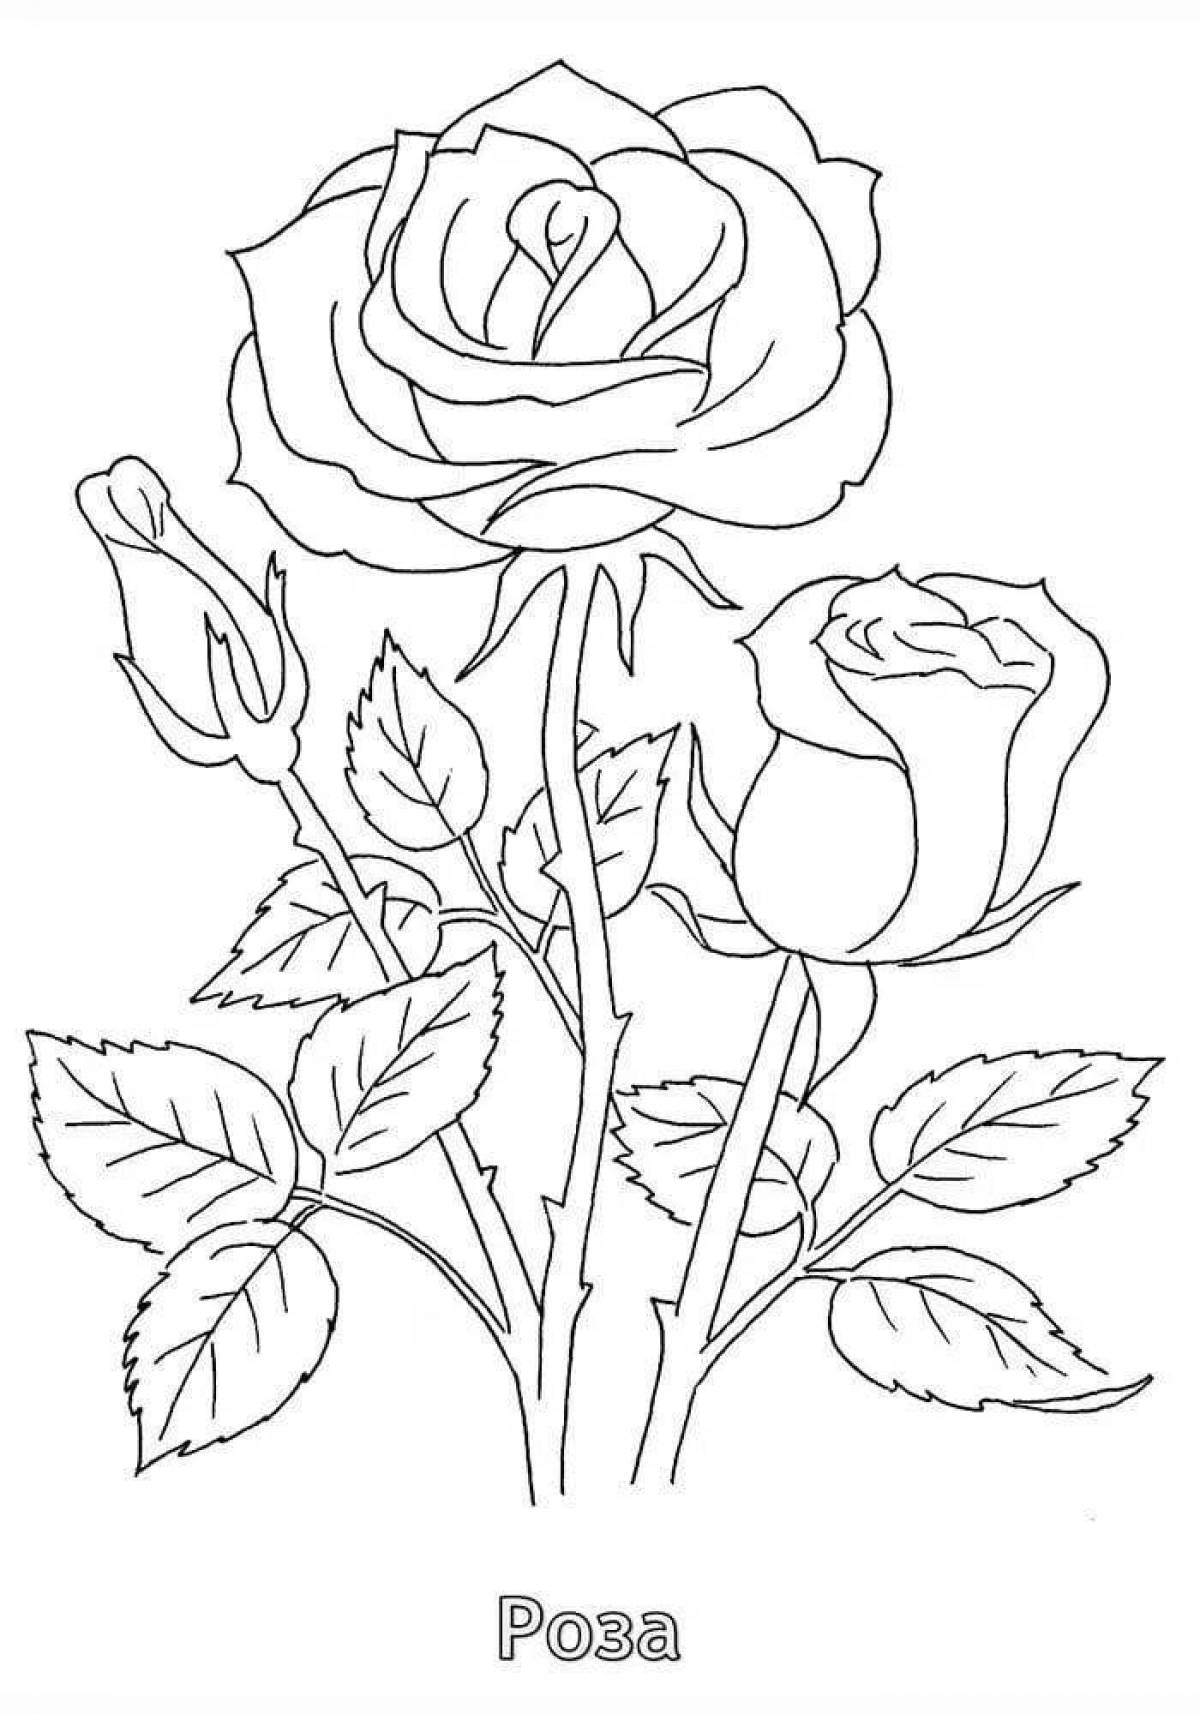 Dazzling coloring drawing of a rose